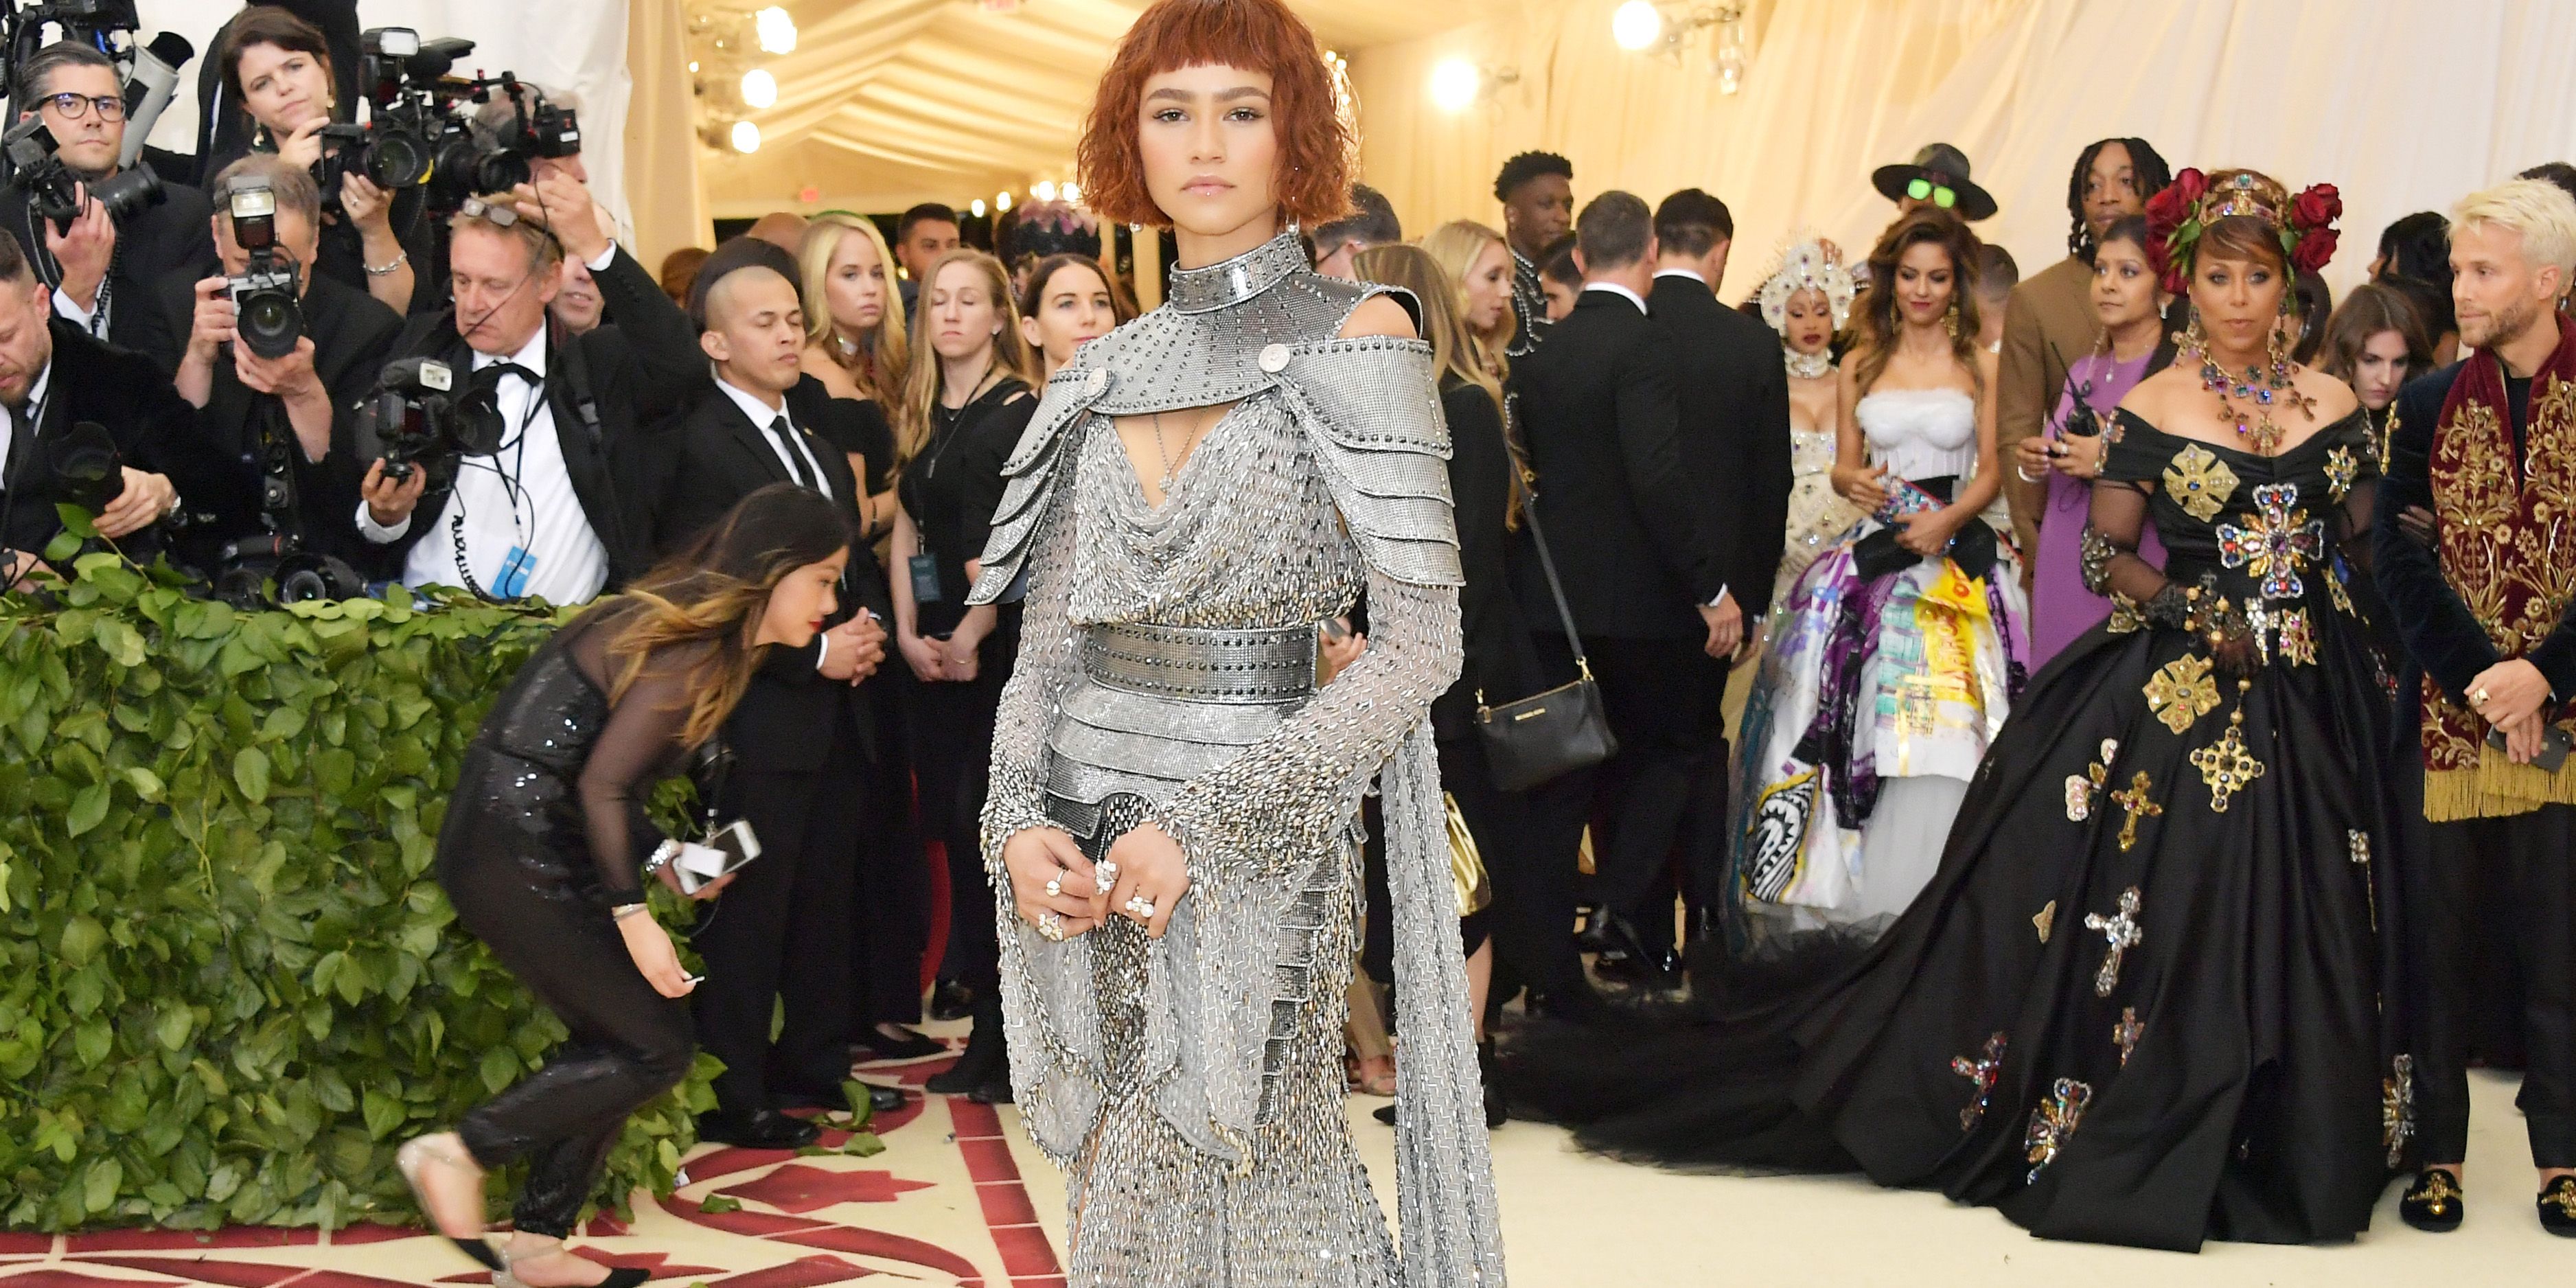 Met Gala 2018: Photos from this year's red carpet | CNN